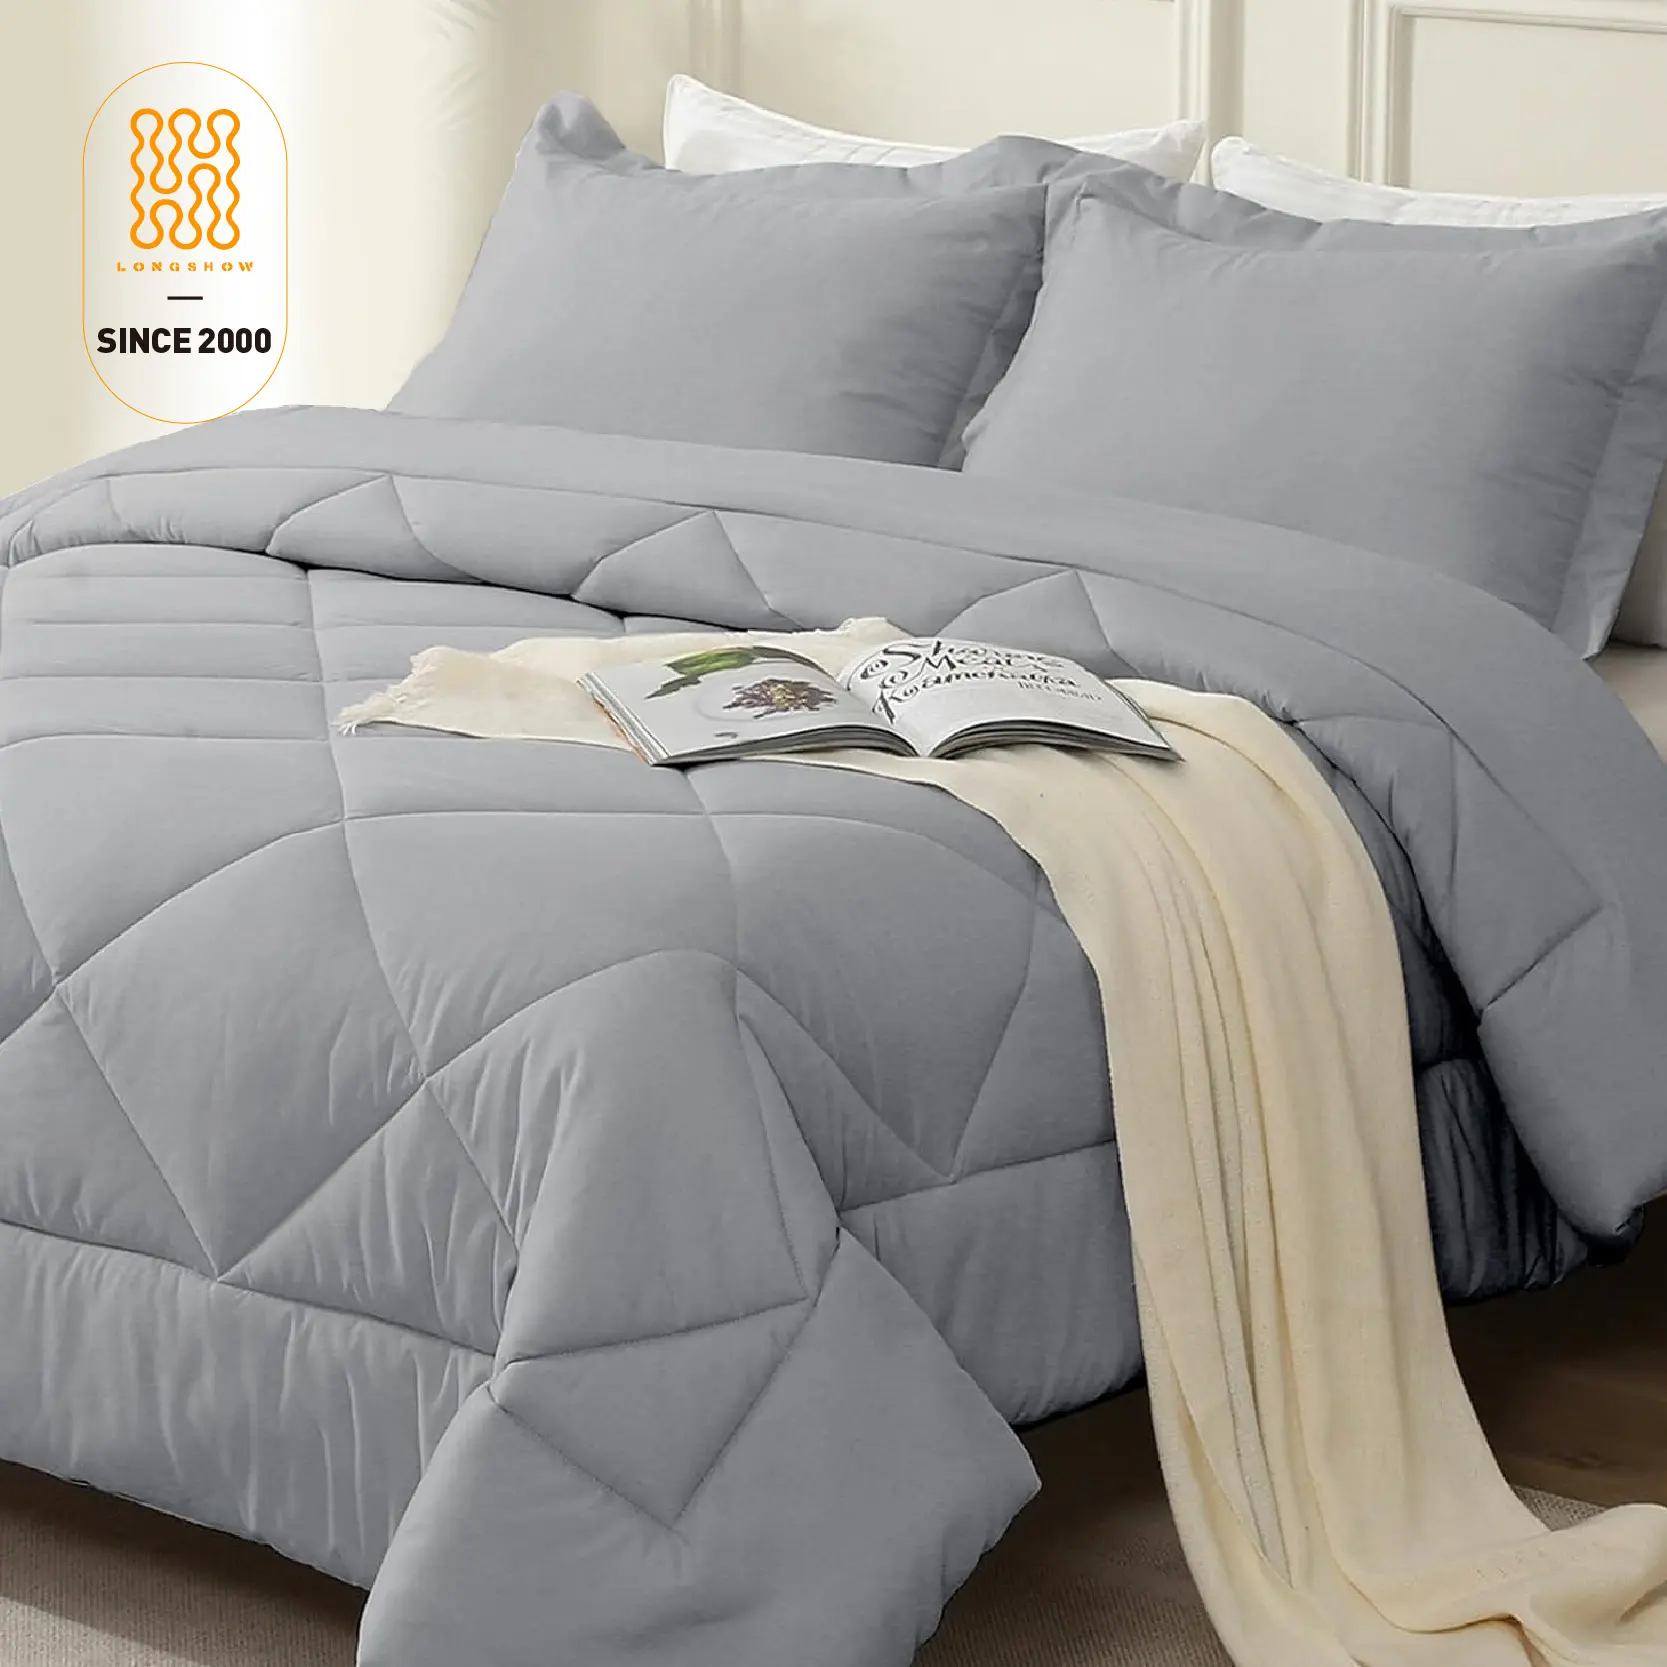 Wholesale Light weight 3 Pieces Bed Set with 1 Comforter and 2 Pillow Shams Bedding Set for All Seasons